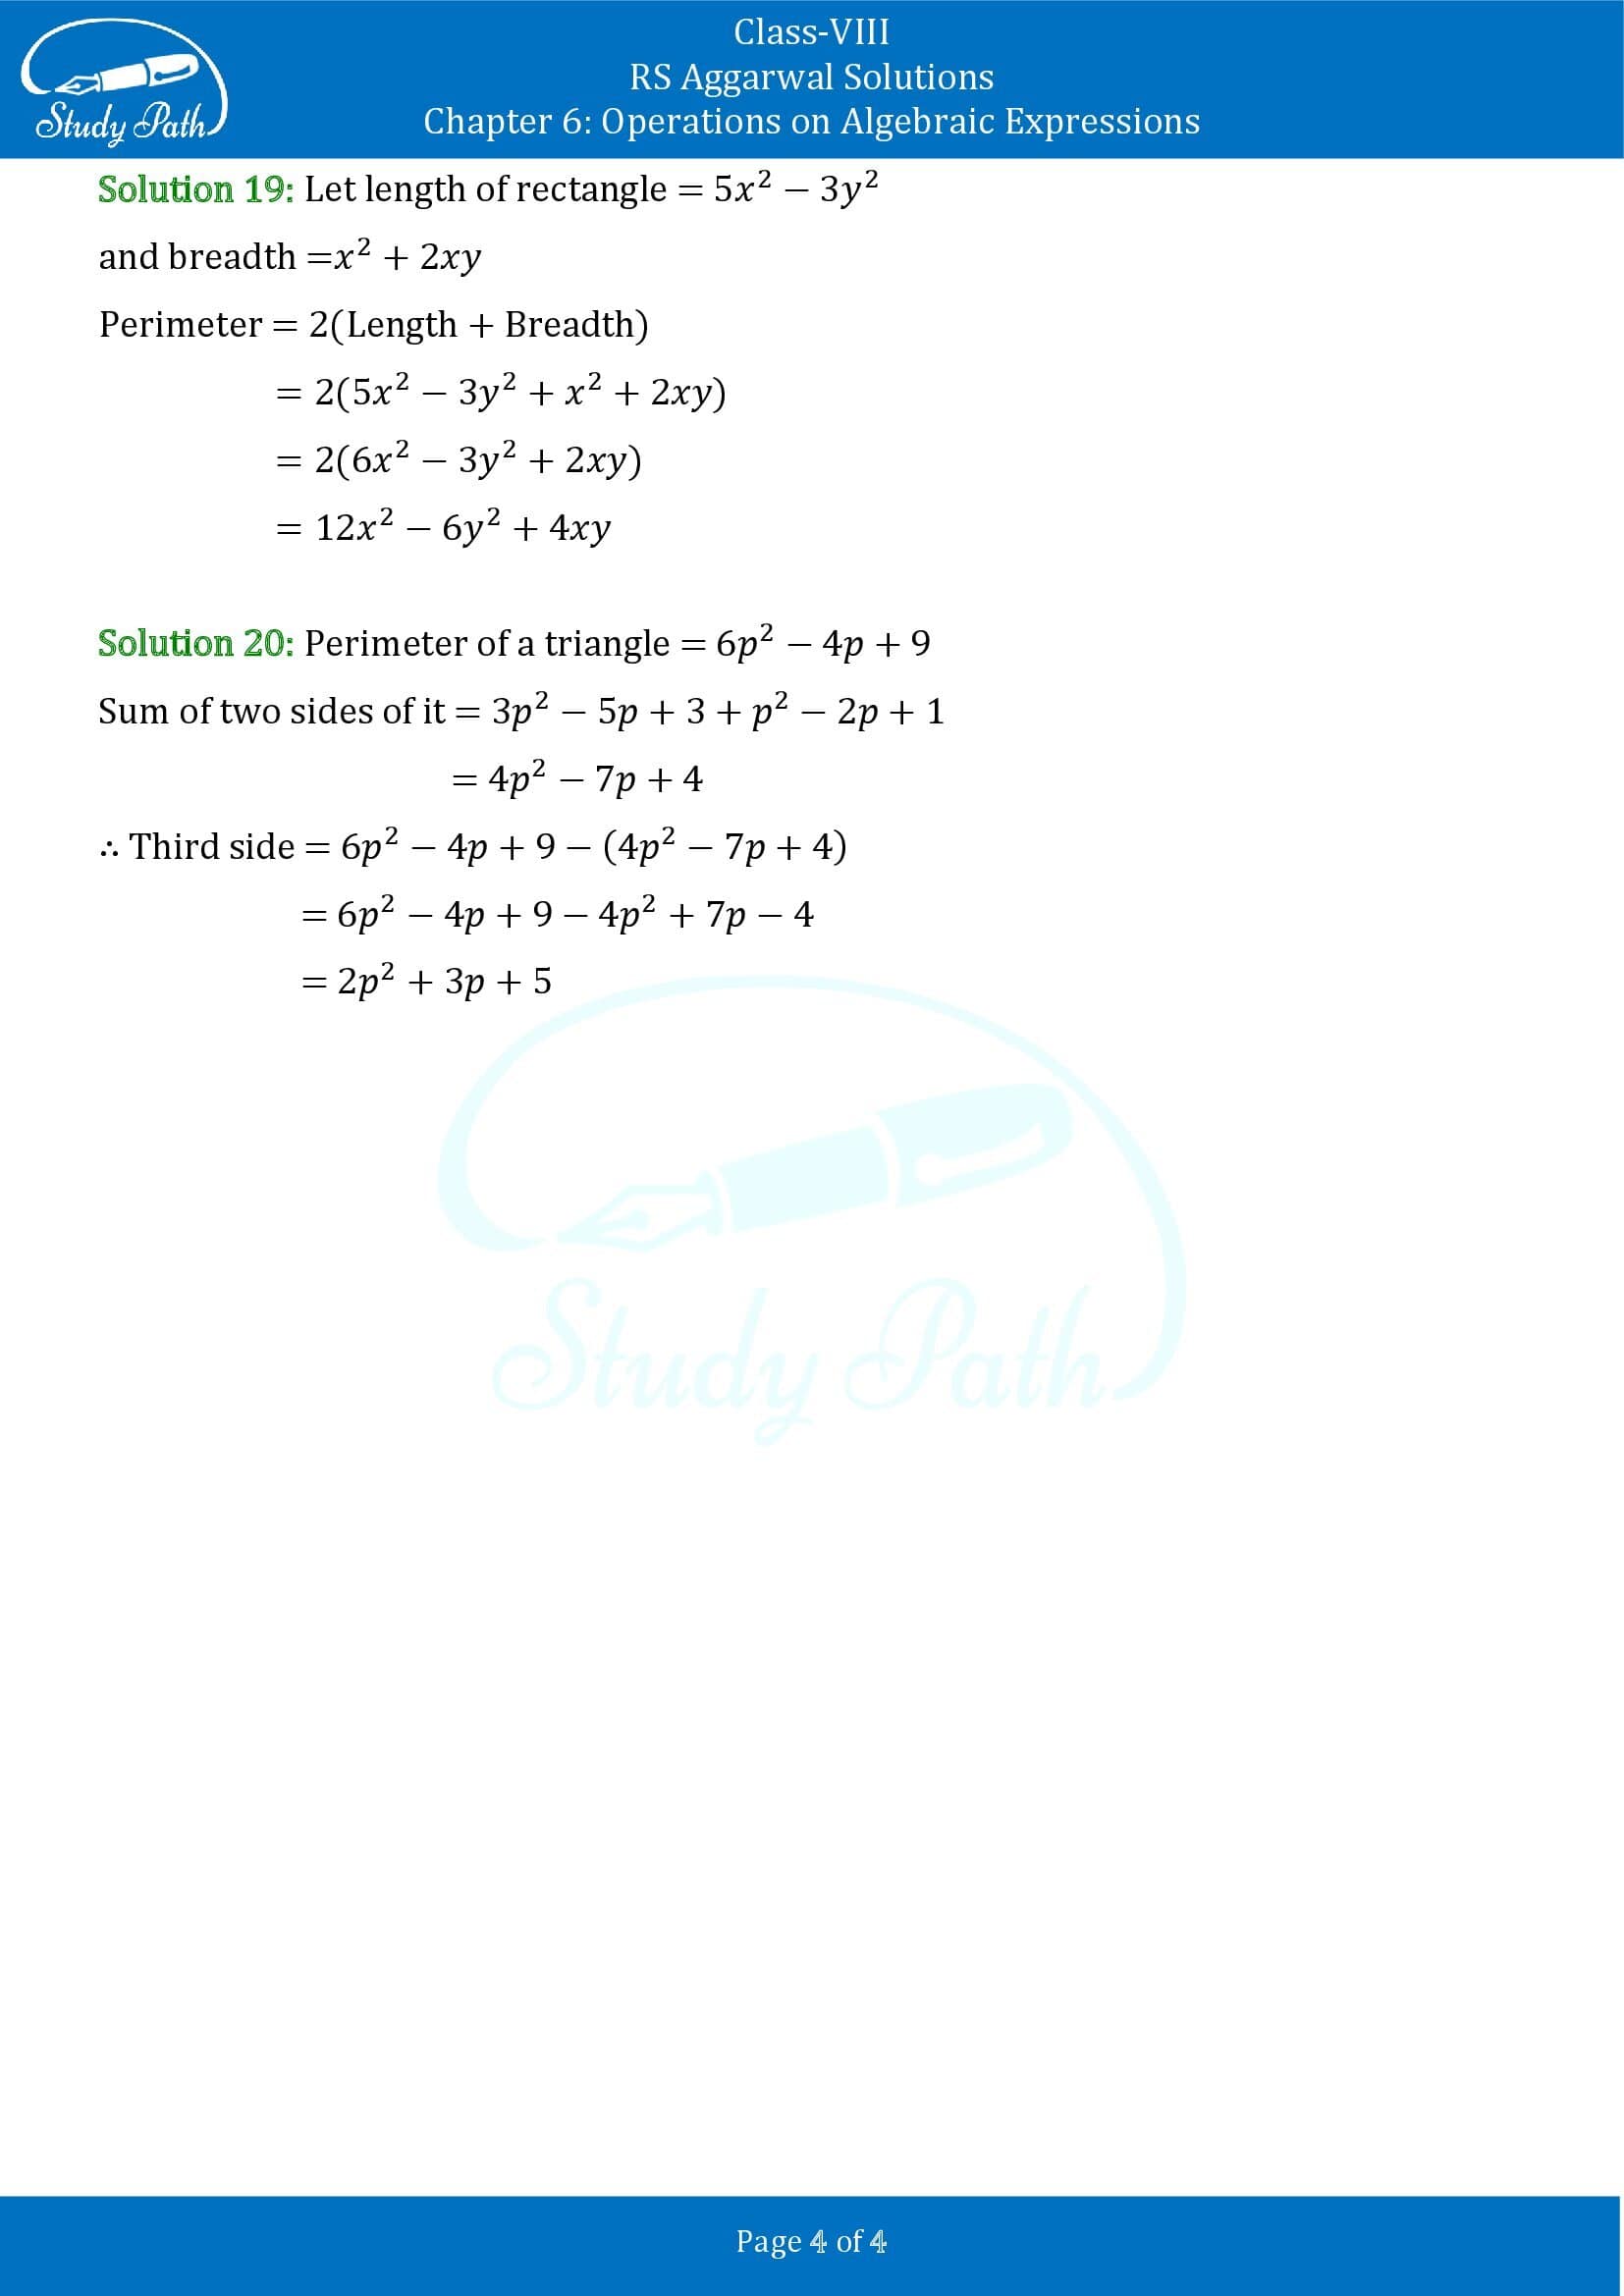 RS Aggarwal Solutions Class 8 Chapter 6 Operations on Algebraic Expressions Exercise 6A 004